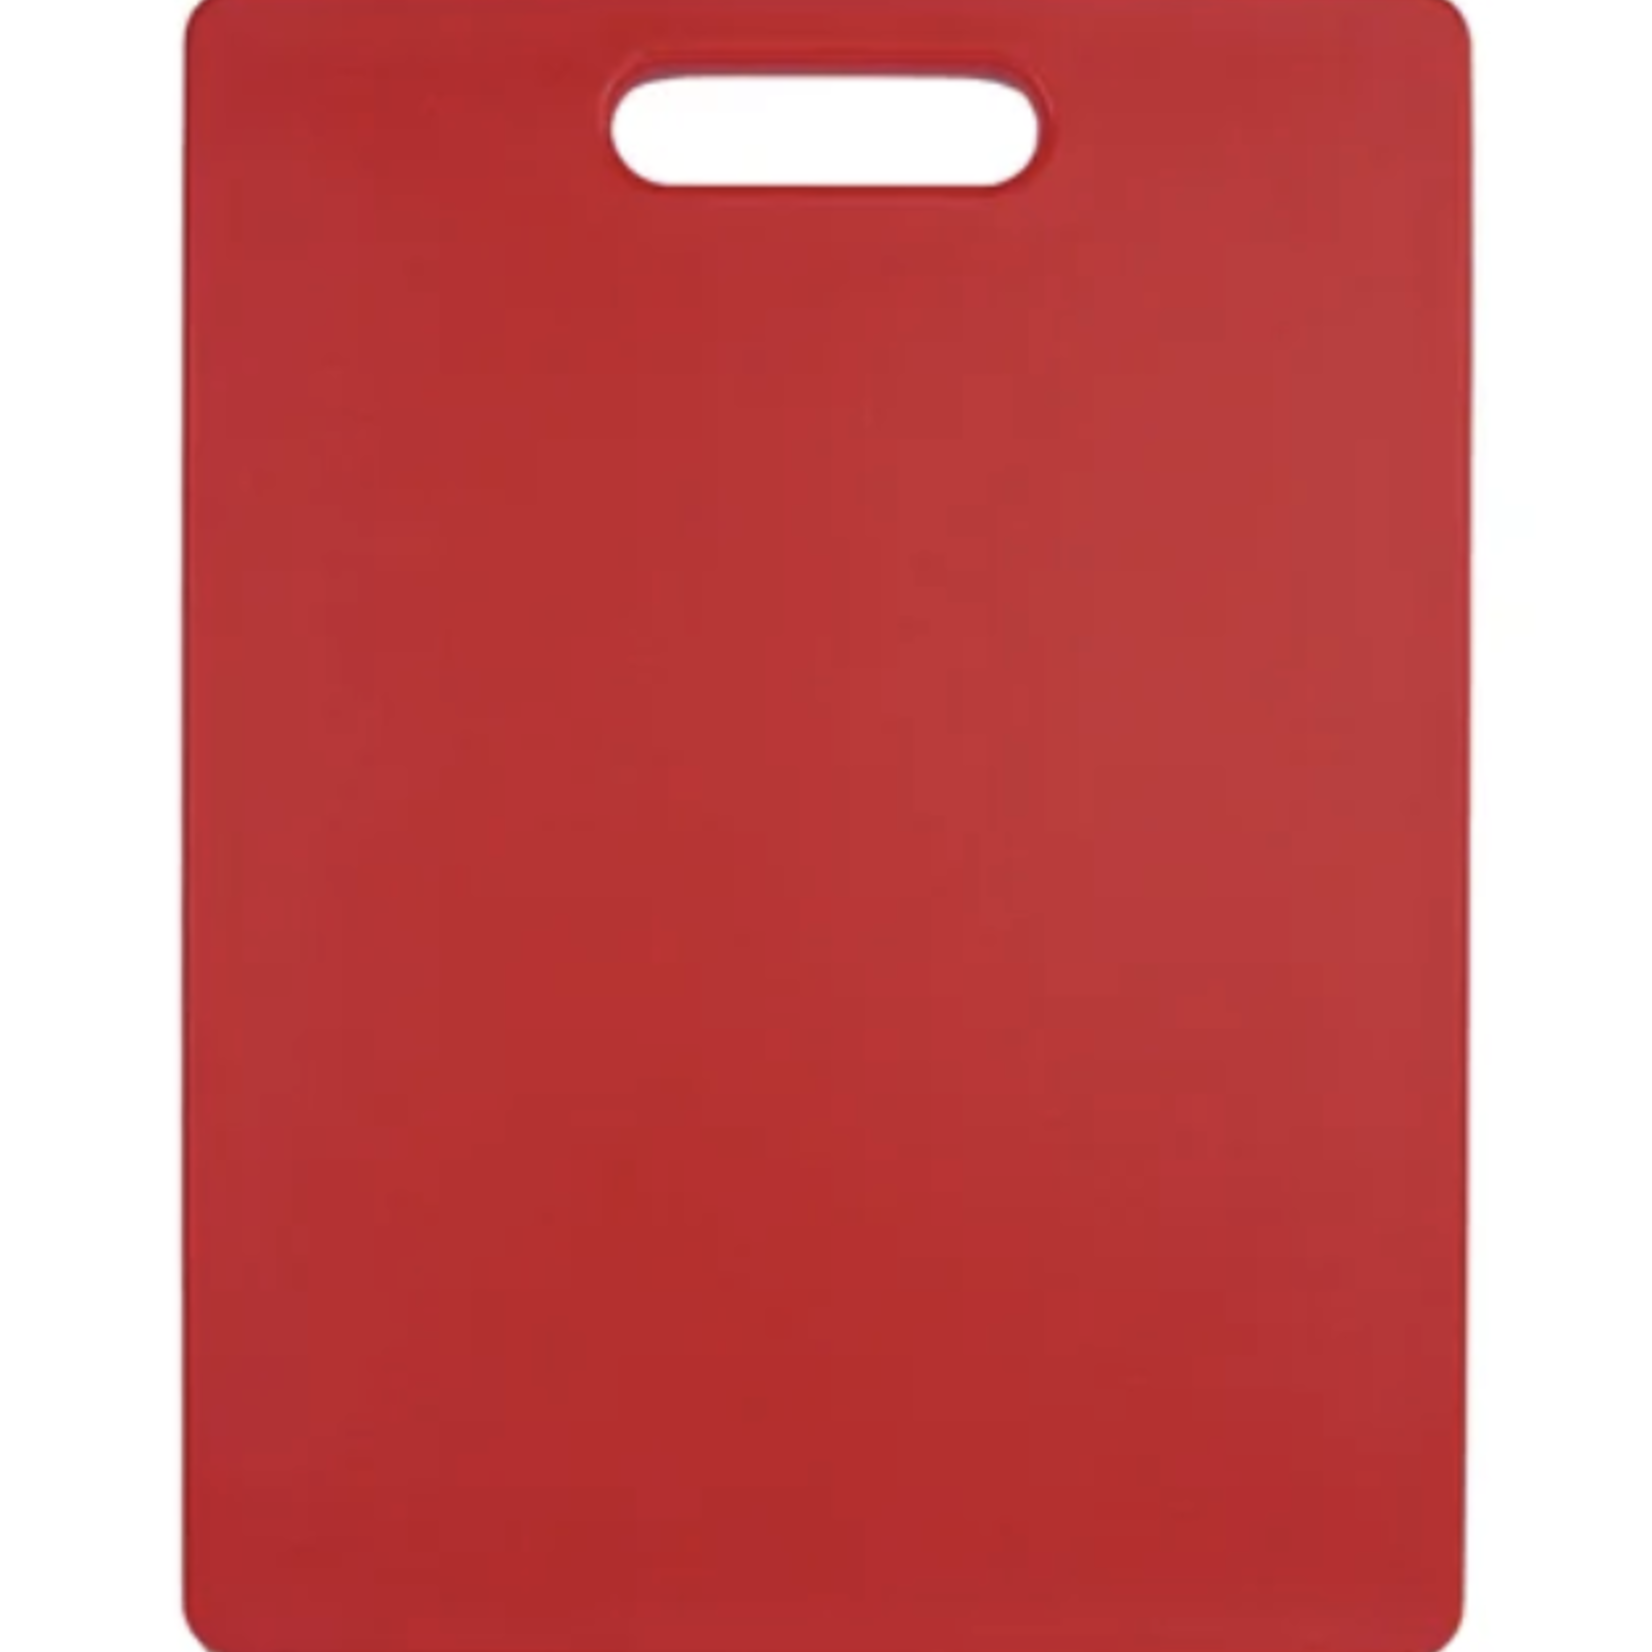 Recycled Cutting Board, 12x16" Red